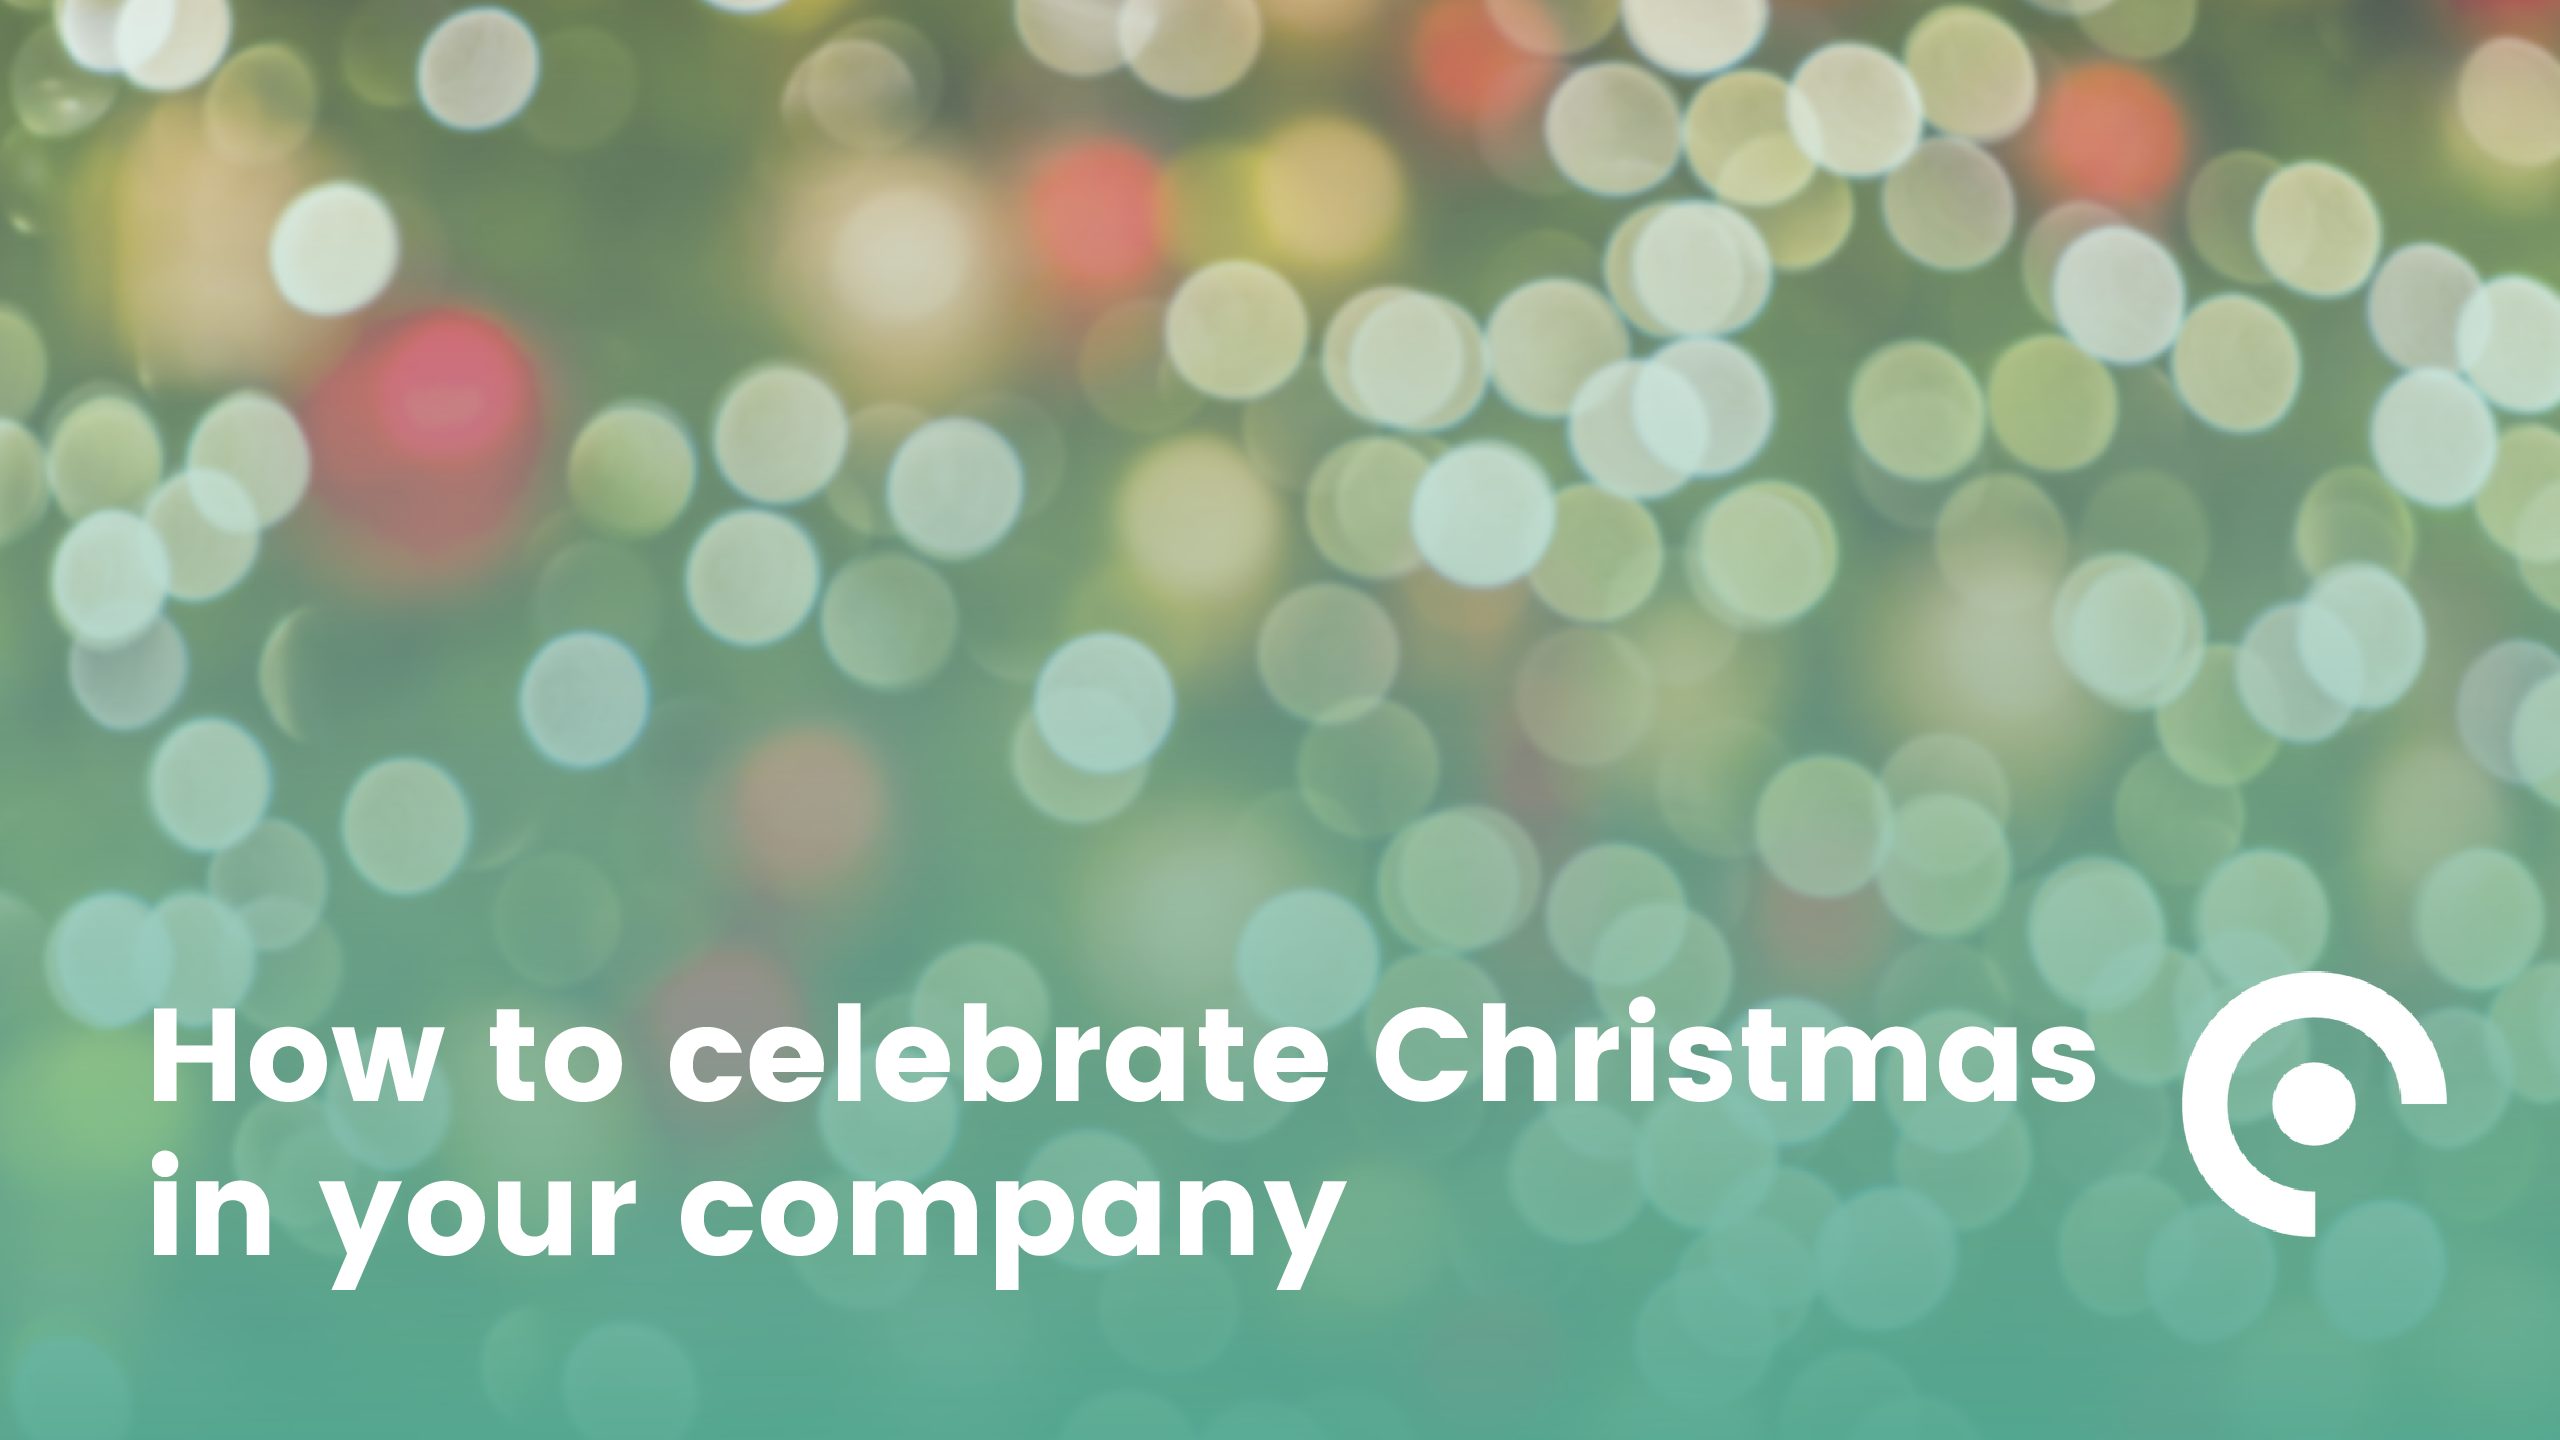 How to celebrate Christmas in your company